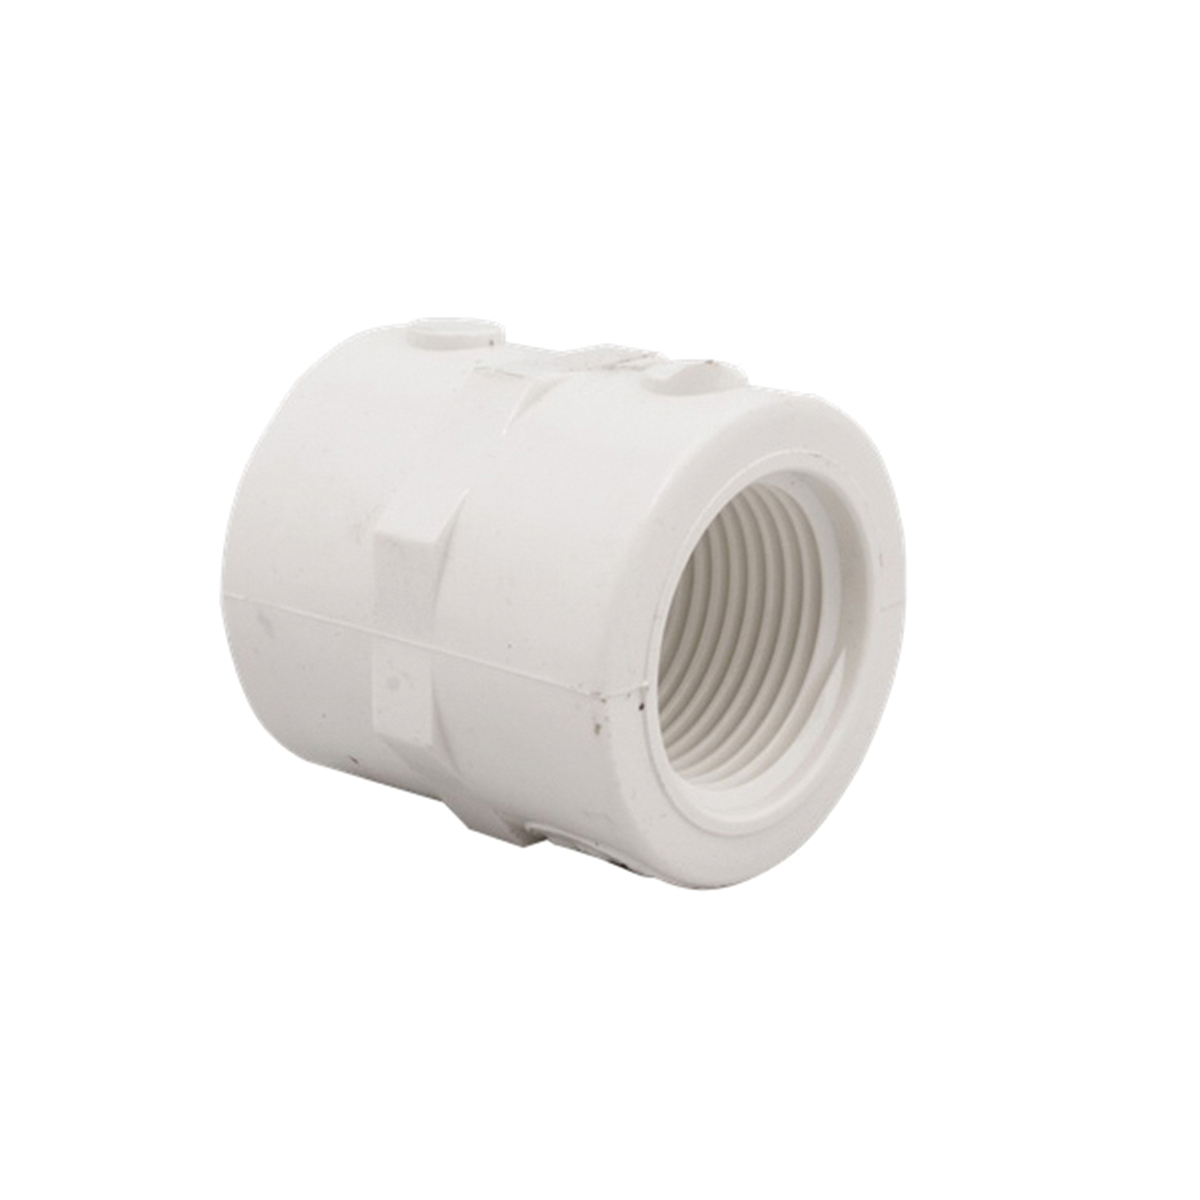 435466 Pipe Coupling, 1/2 in, FPT, PVC, SCH 40 Schedule